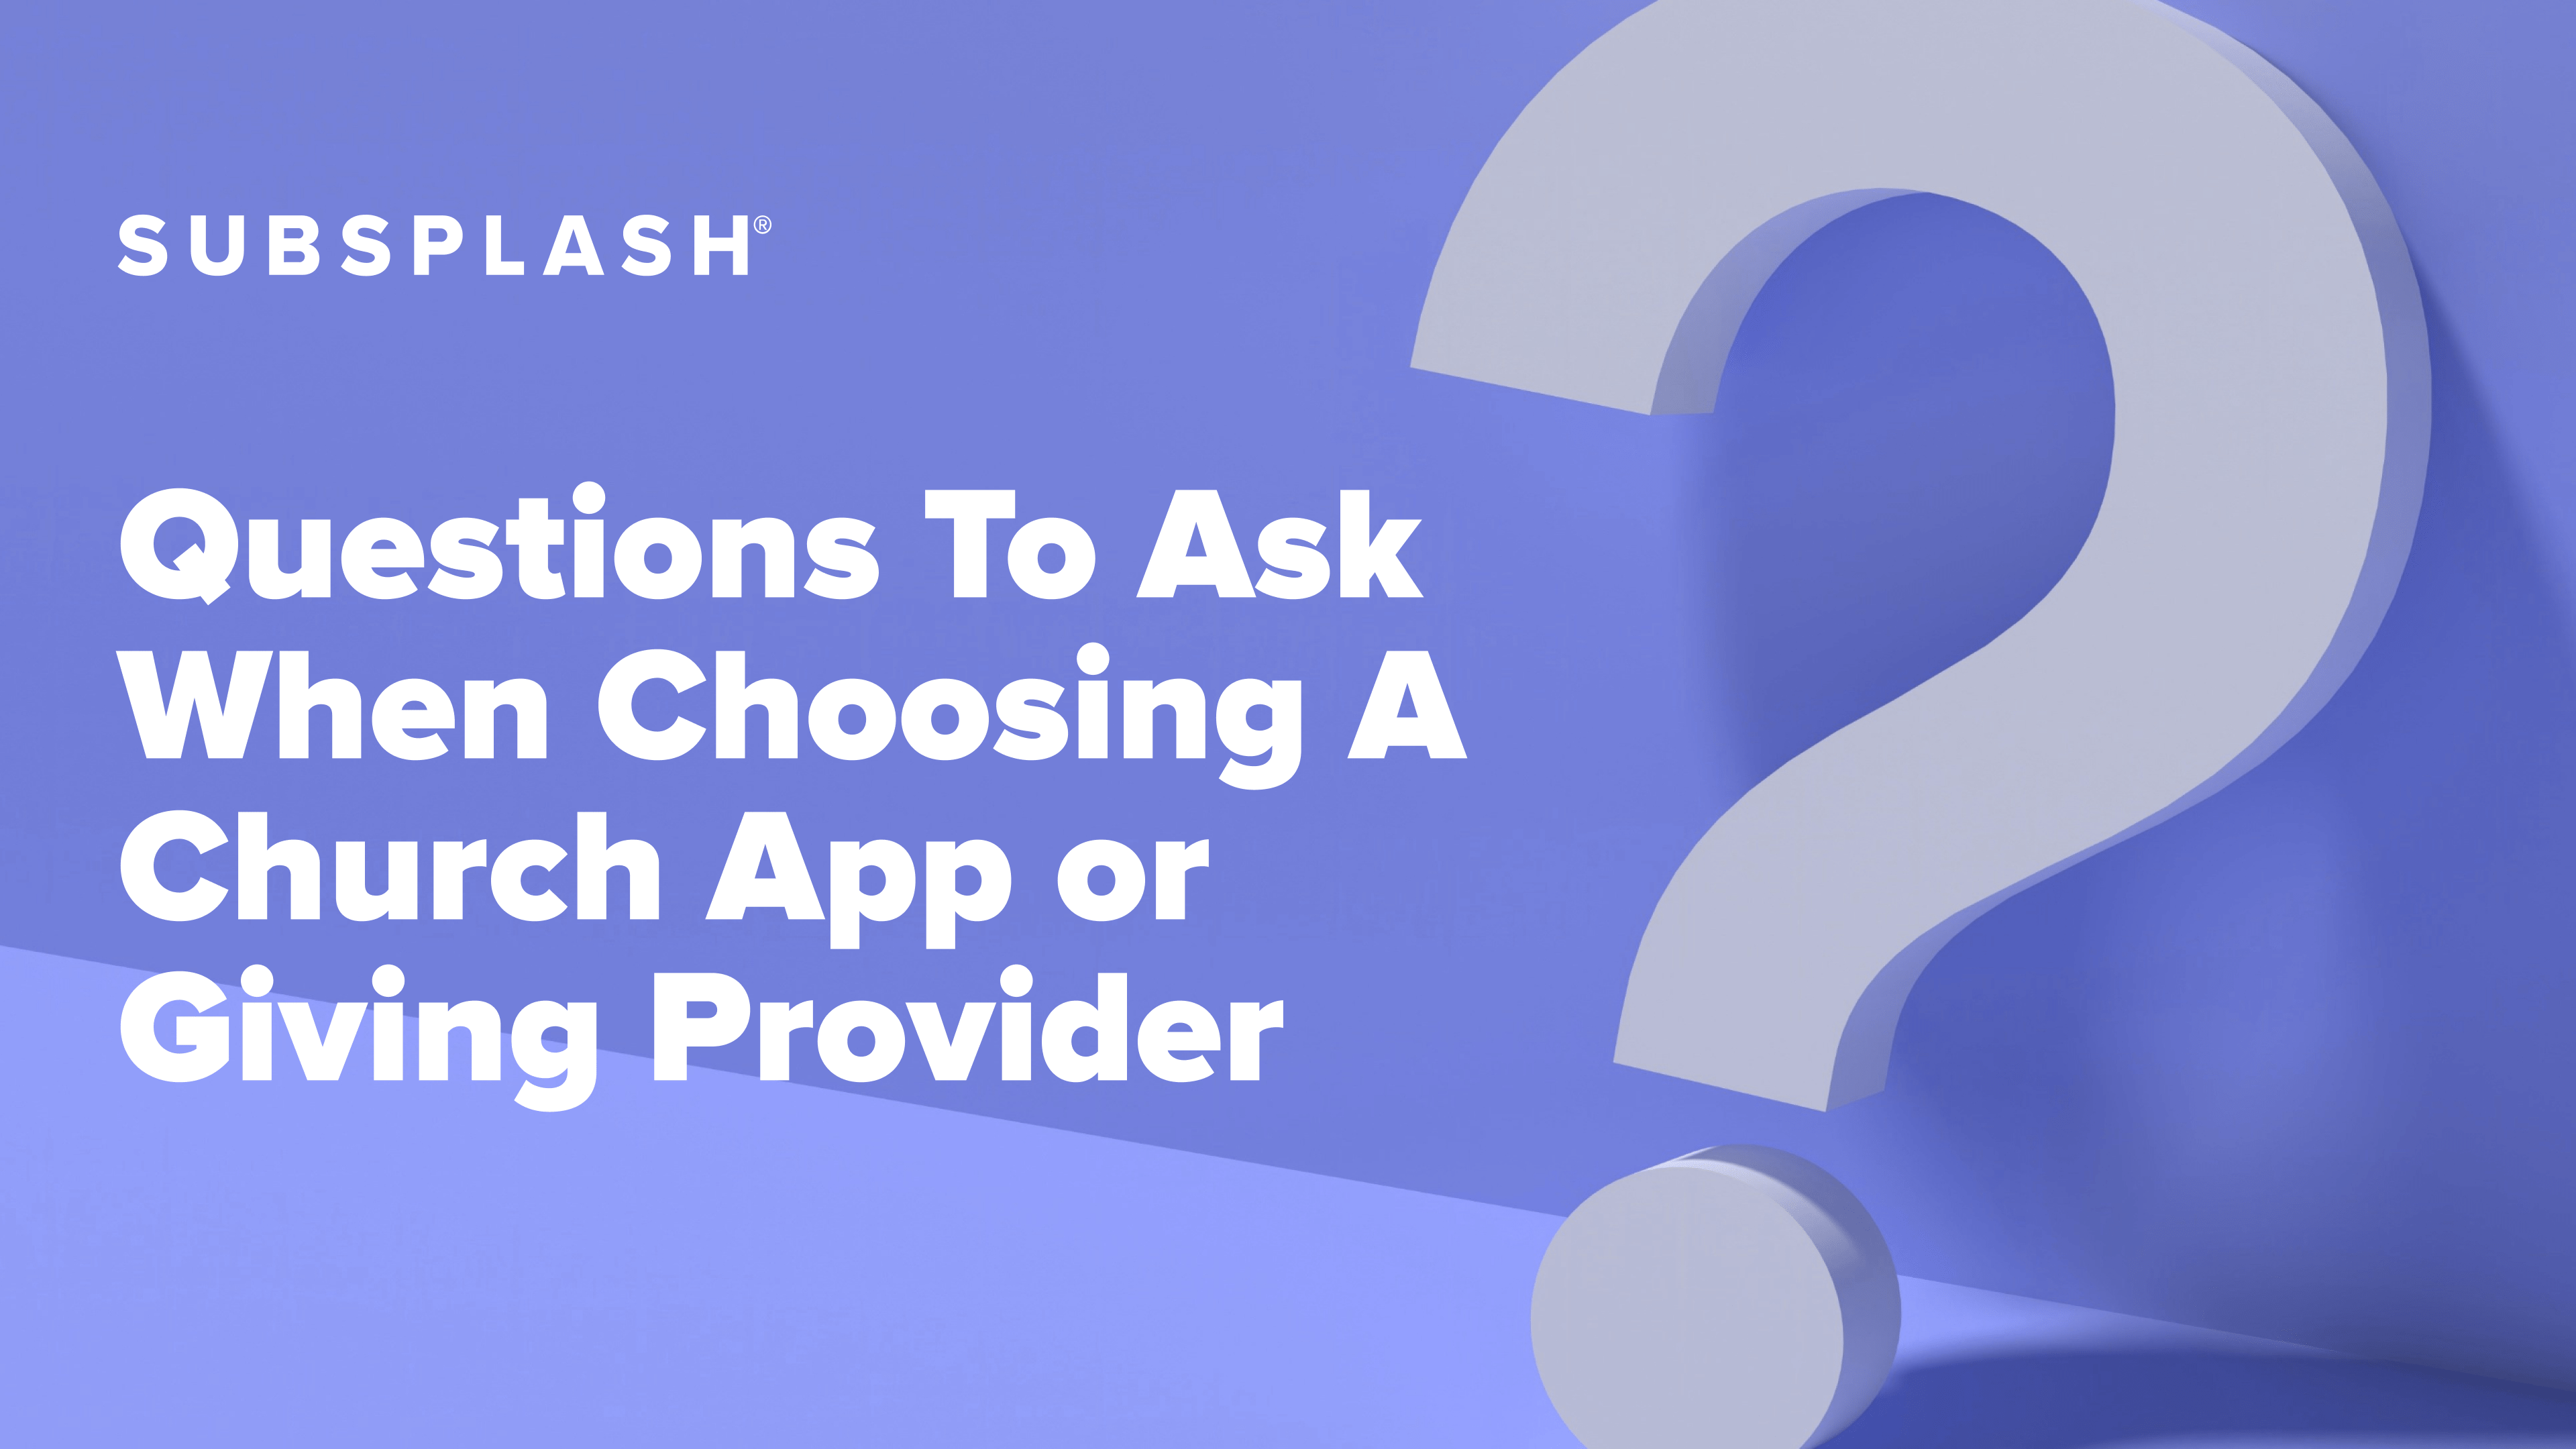 QUESTIONS TO ASK WHEN CHOOSING A CHURCH APP OR GIVING PROVIDER